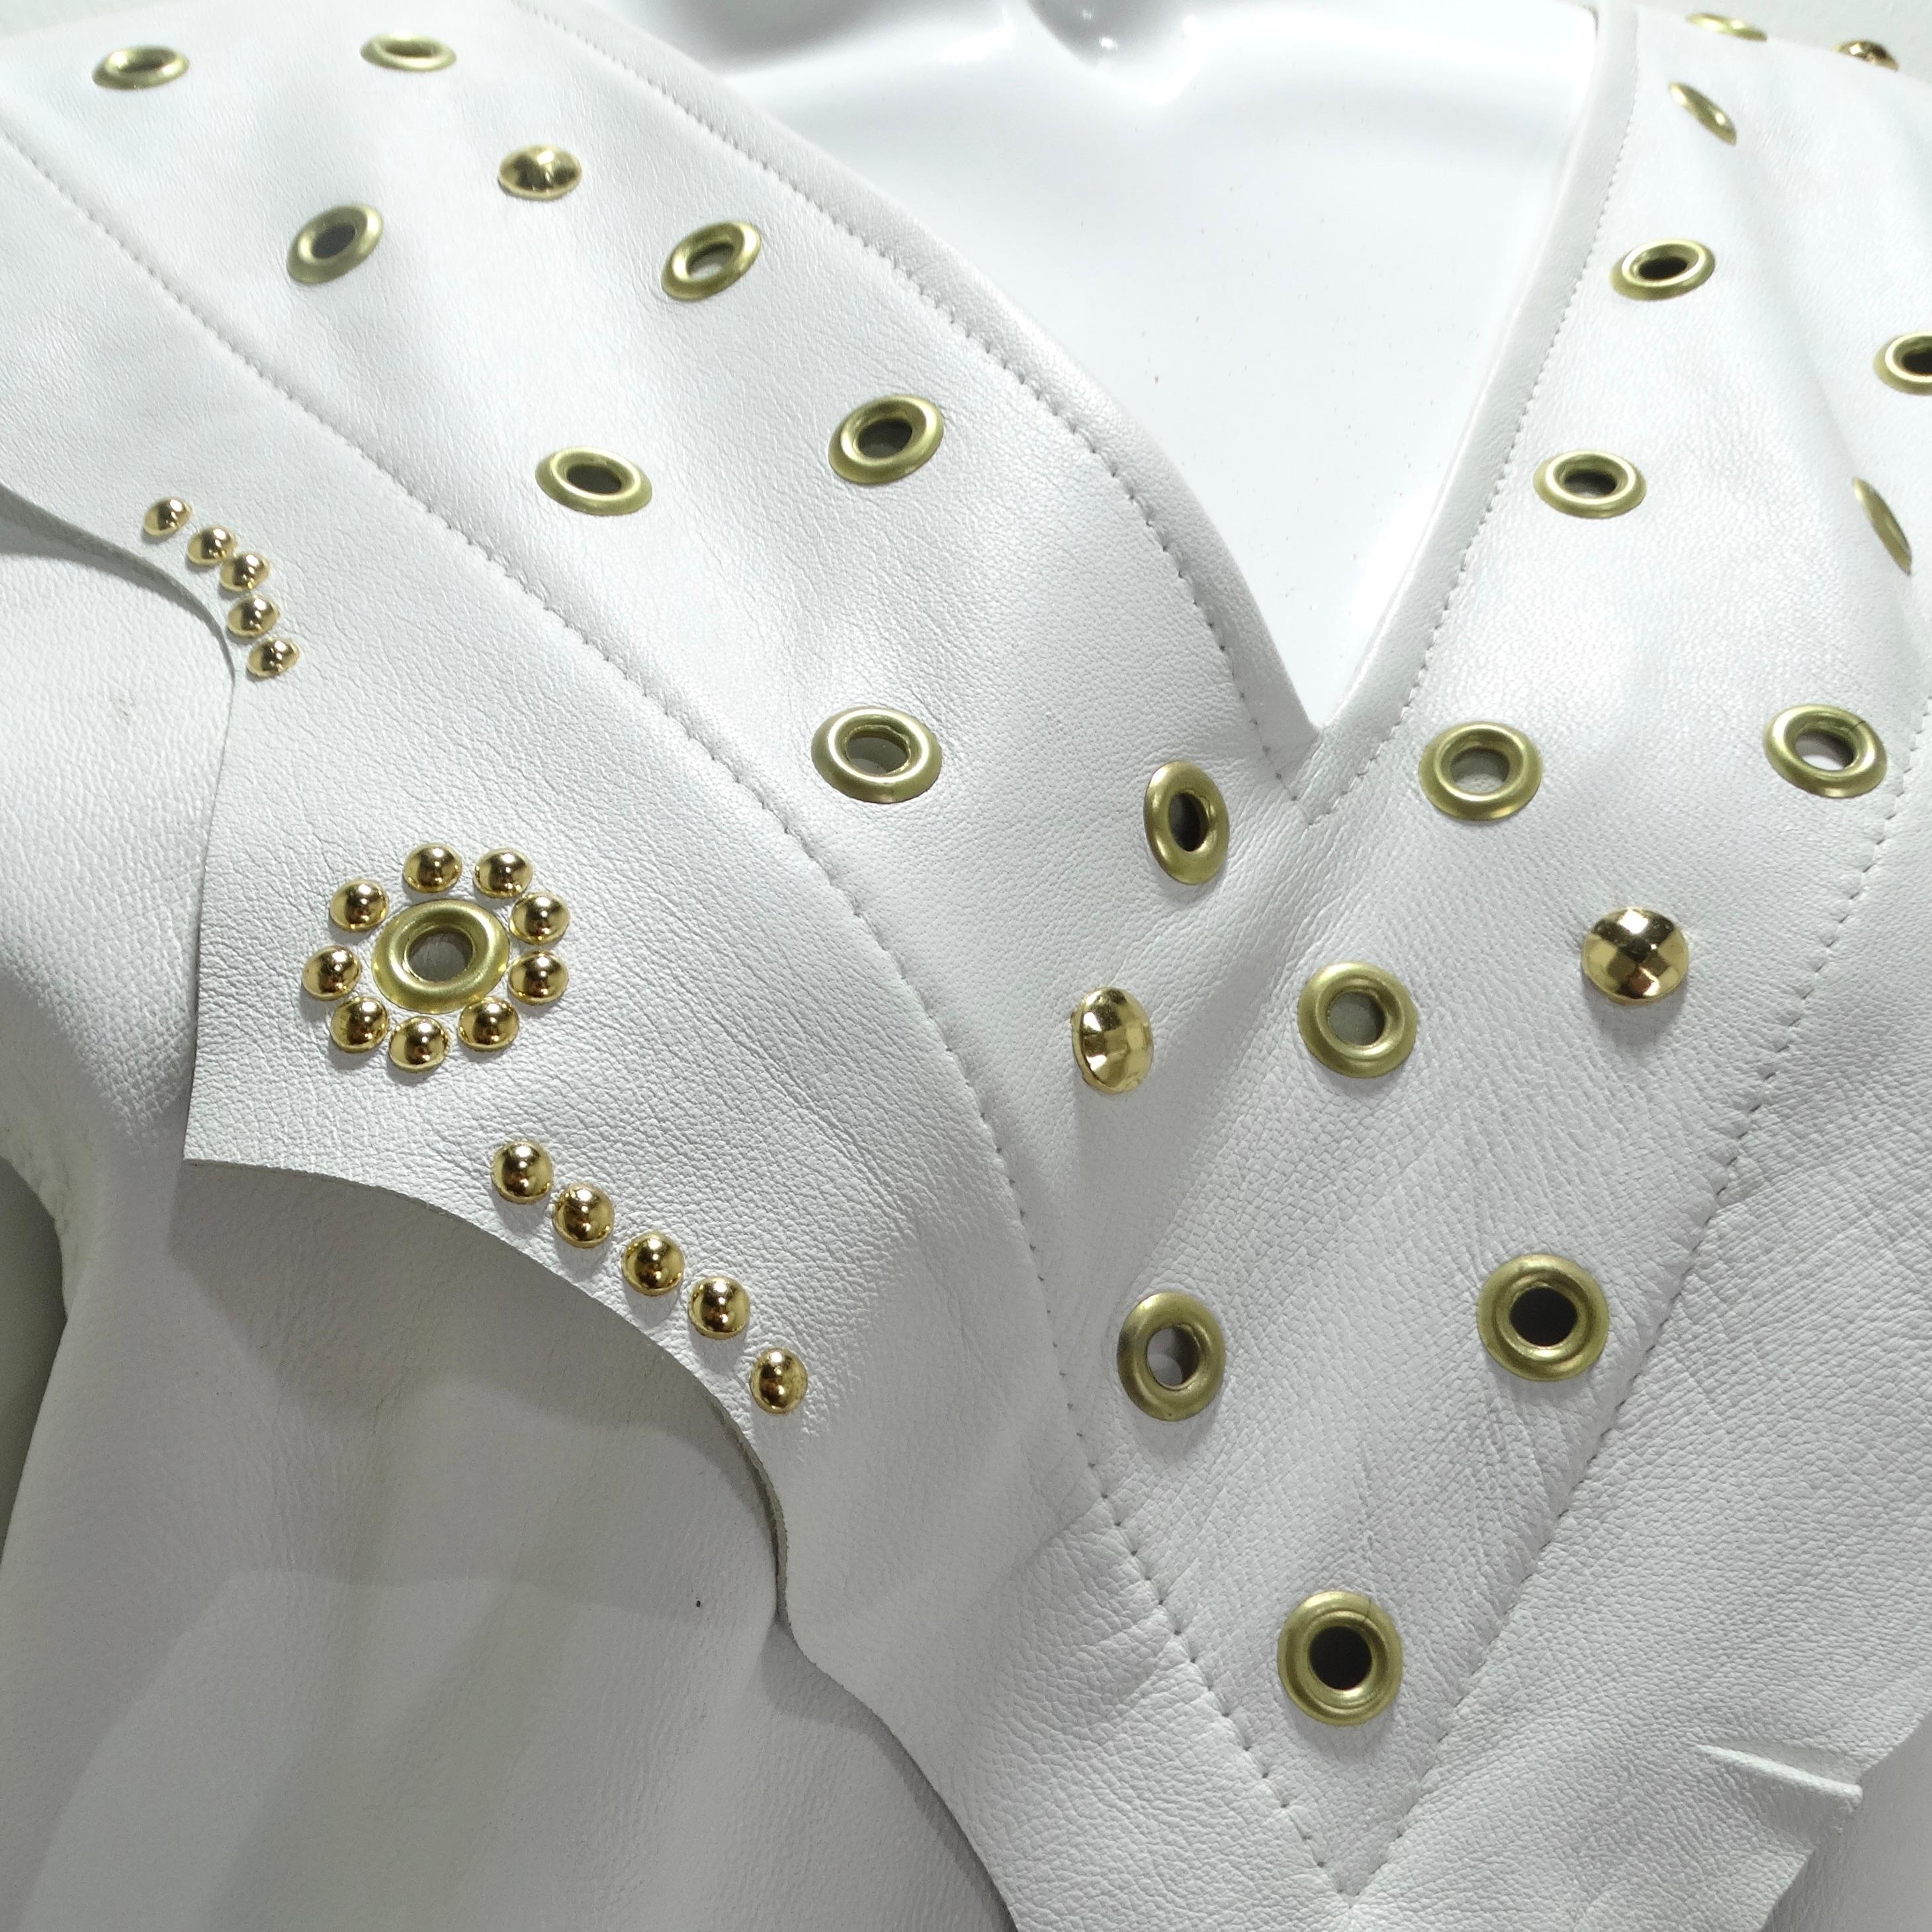 Gray Jacques Lelong 1980s White Leather Studded Dress For Sale